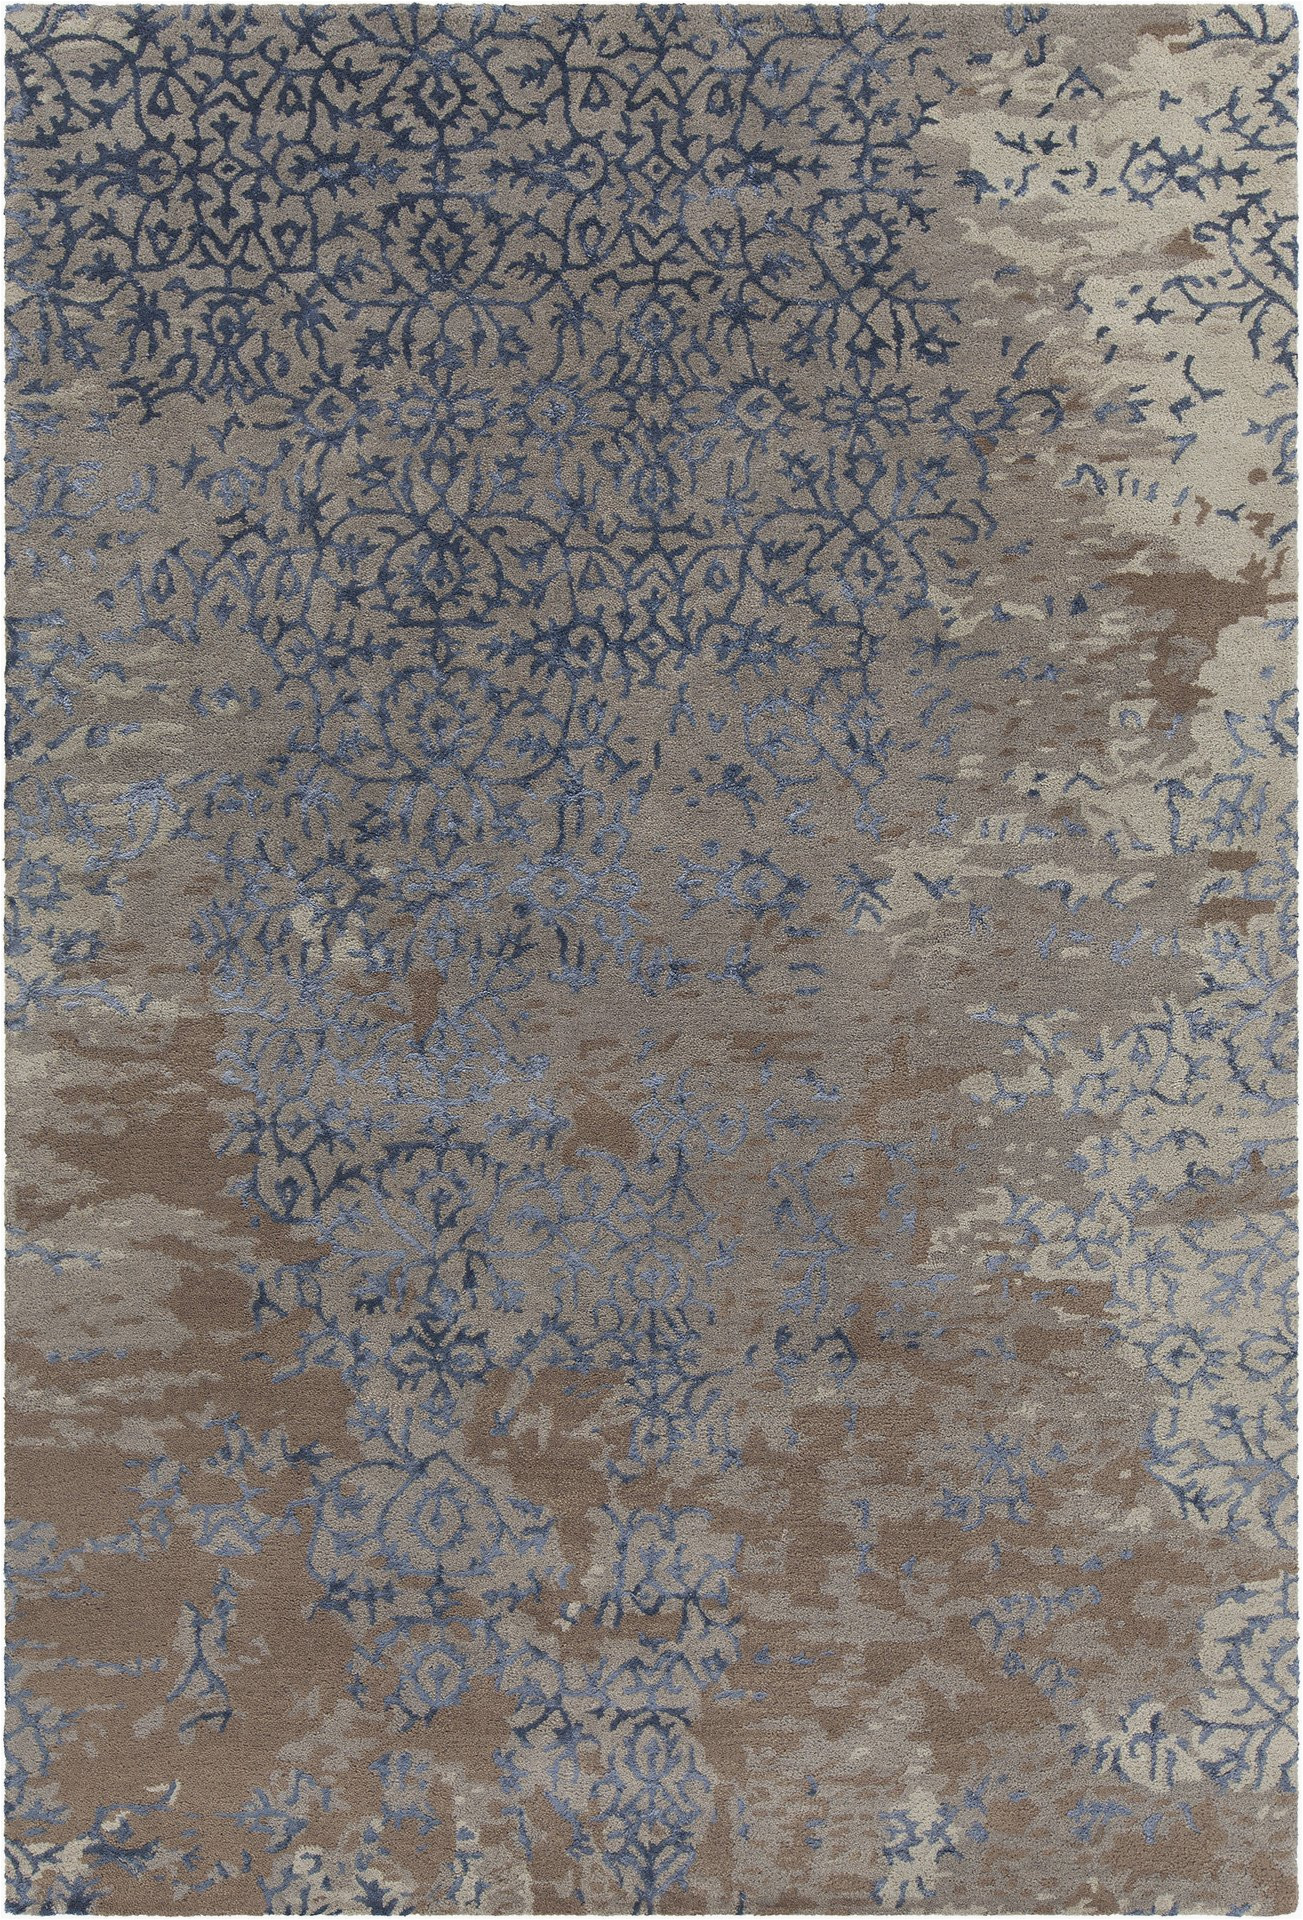 Blue and Brown Living Room Rugs Rupec Collection Hand Tufted area Rug In Grey Blue Brown